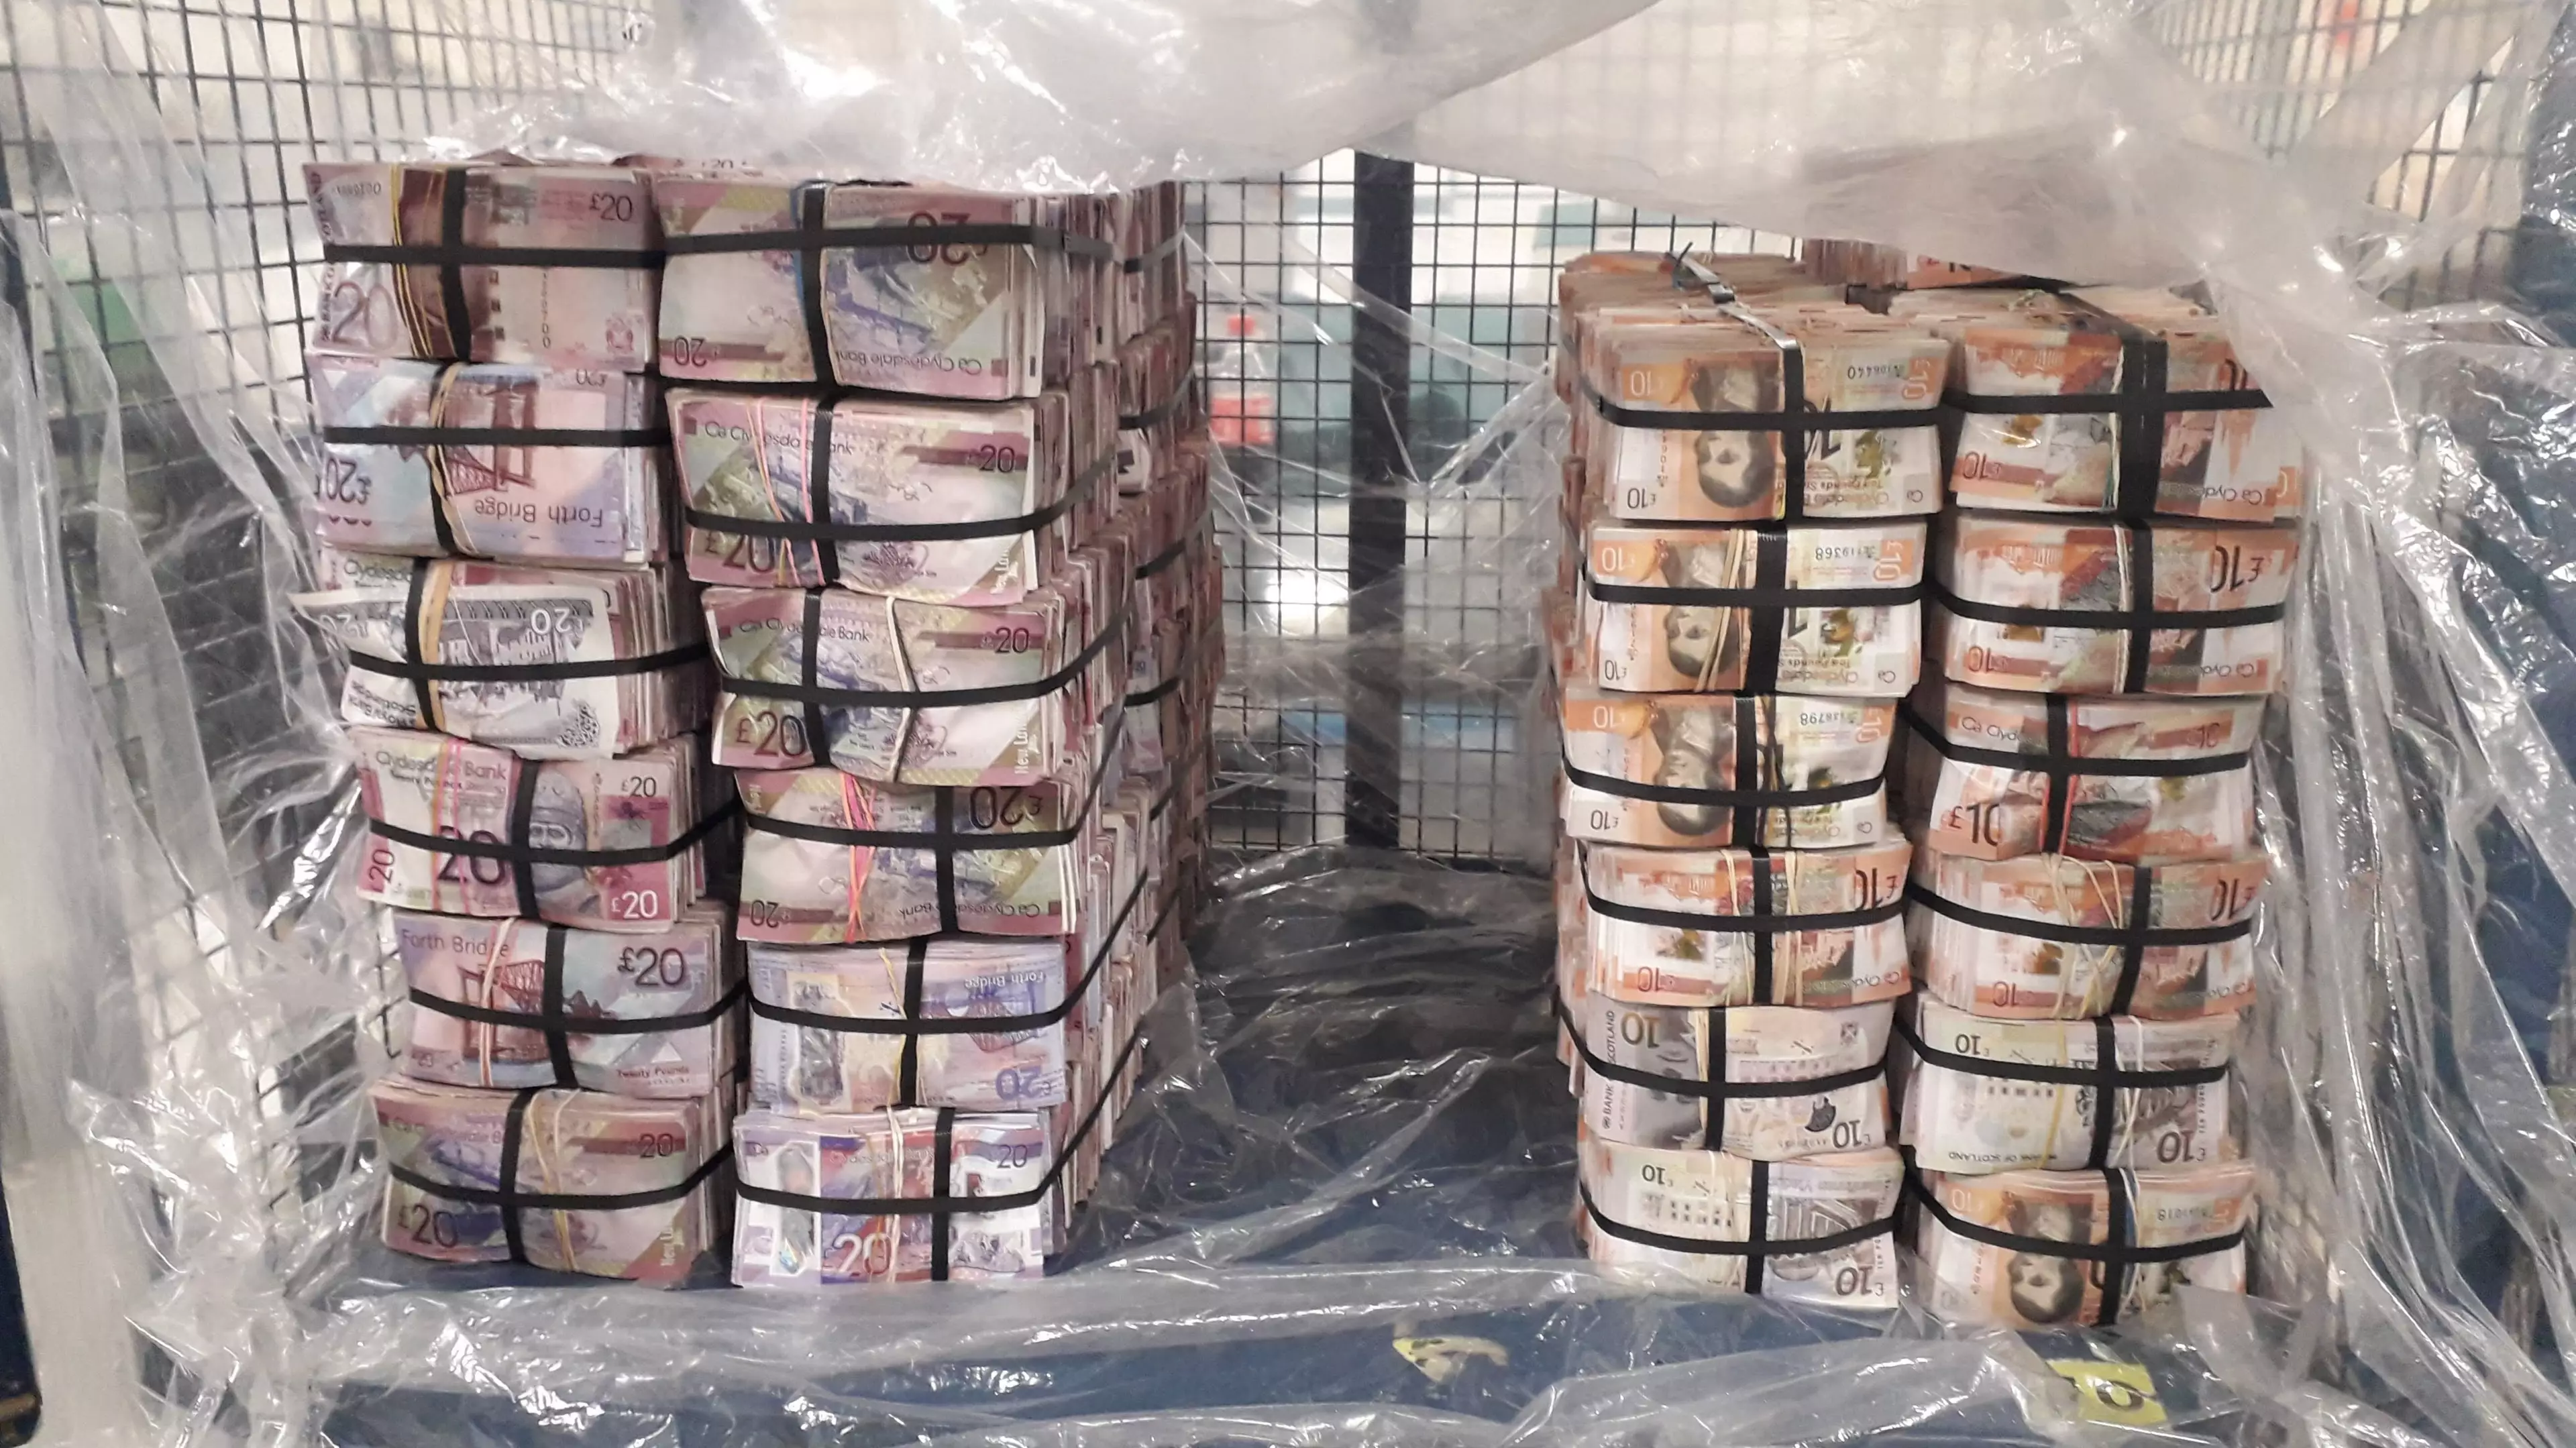 Police Discover £5 Million In London Flat After Gang 'Didn't Know What To Do With It'